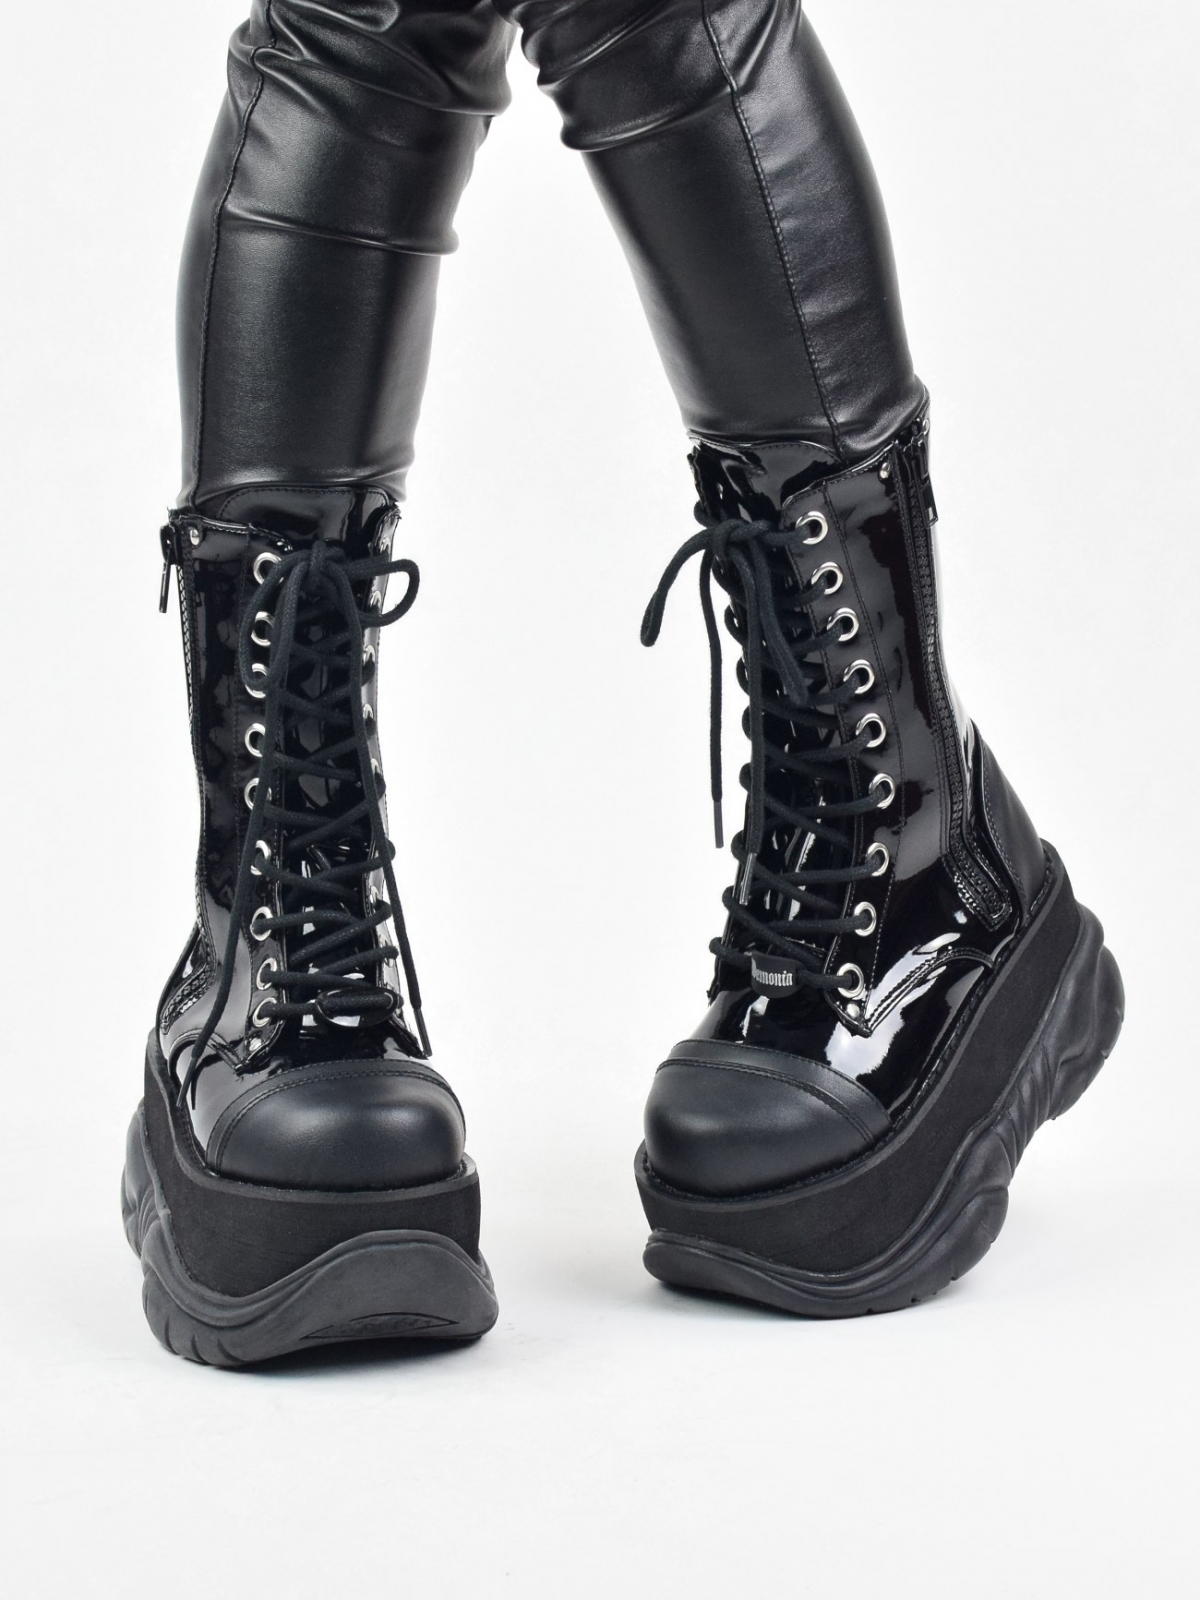 Demonia Neptune 200 lace up mid calf high platform boots in black